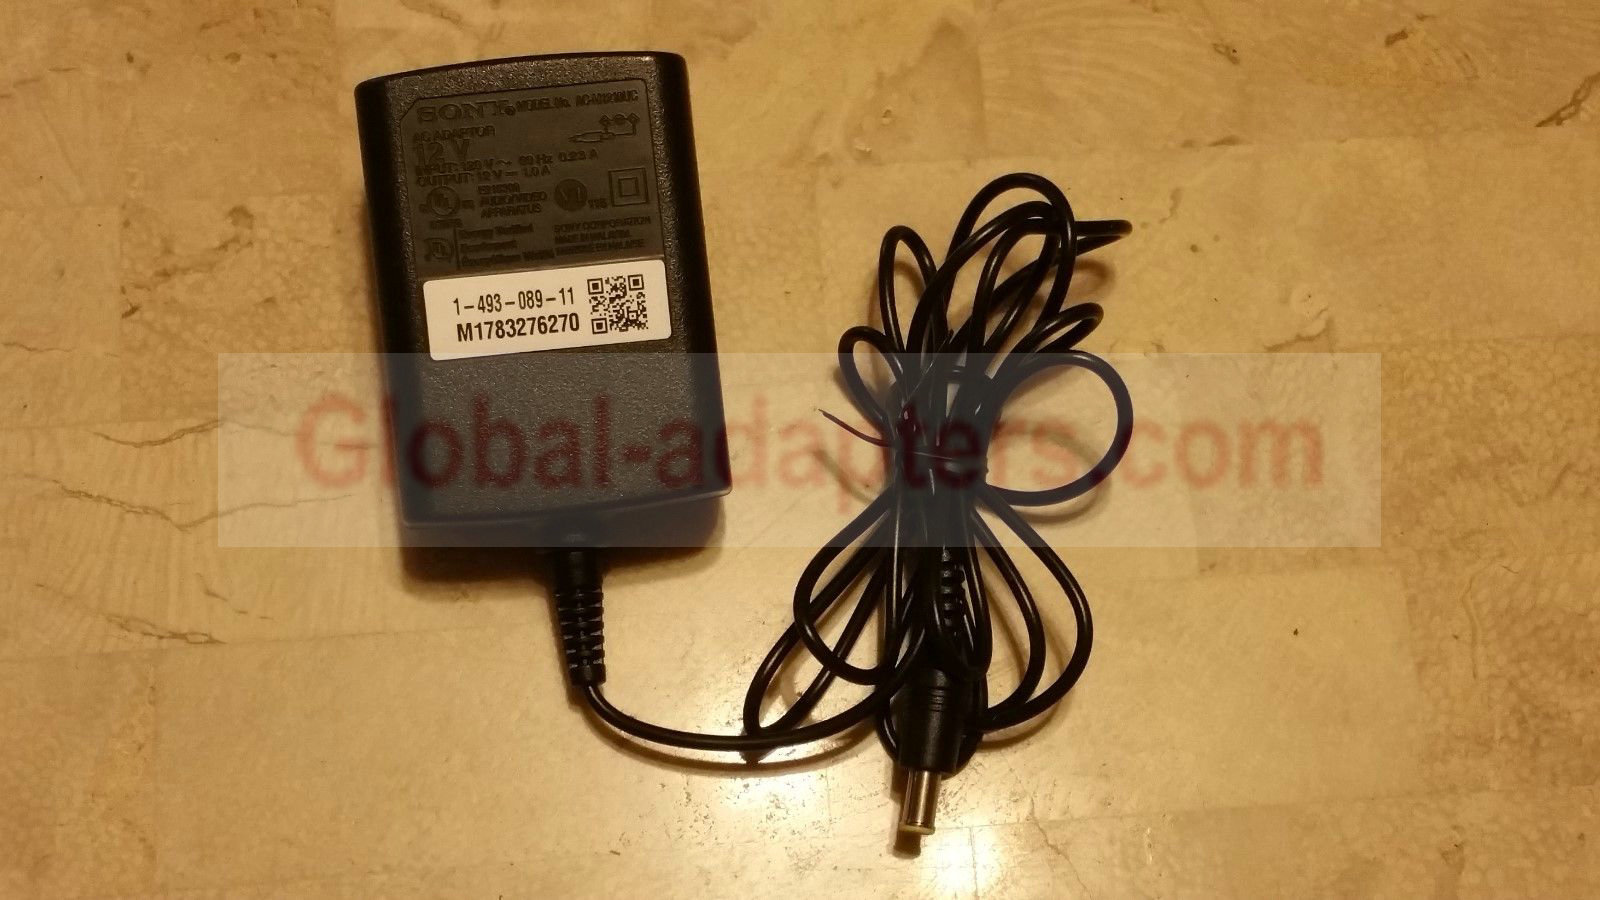 New 12V 1A Sony AC-M1210UC 1-493-089-11 Power Adapter for Sony Bluray Players